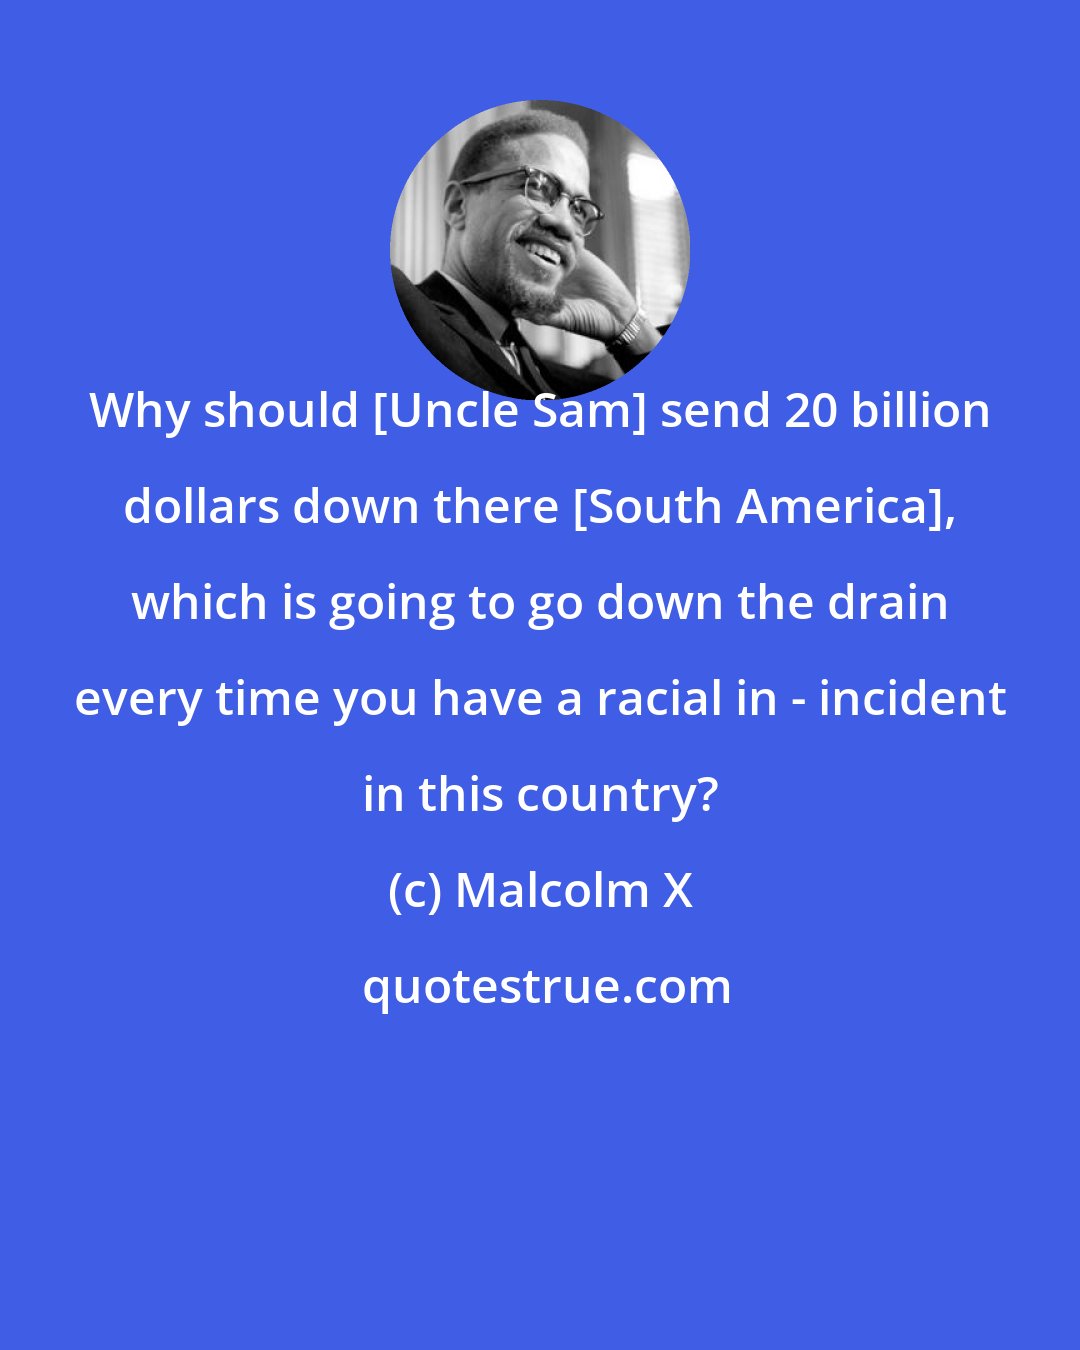 Malcolm X: Why should [Uncle Sam] send 20 billion dollars down there [South America], which is going to go down the drain every time you have a racial in - incident in this country?